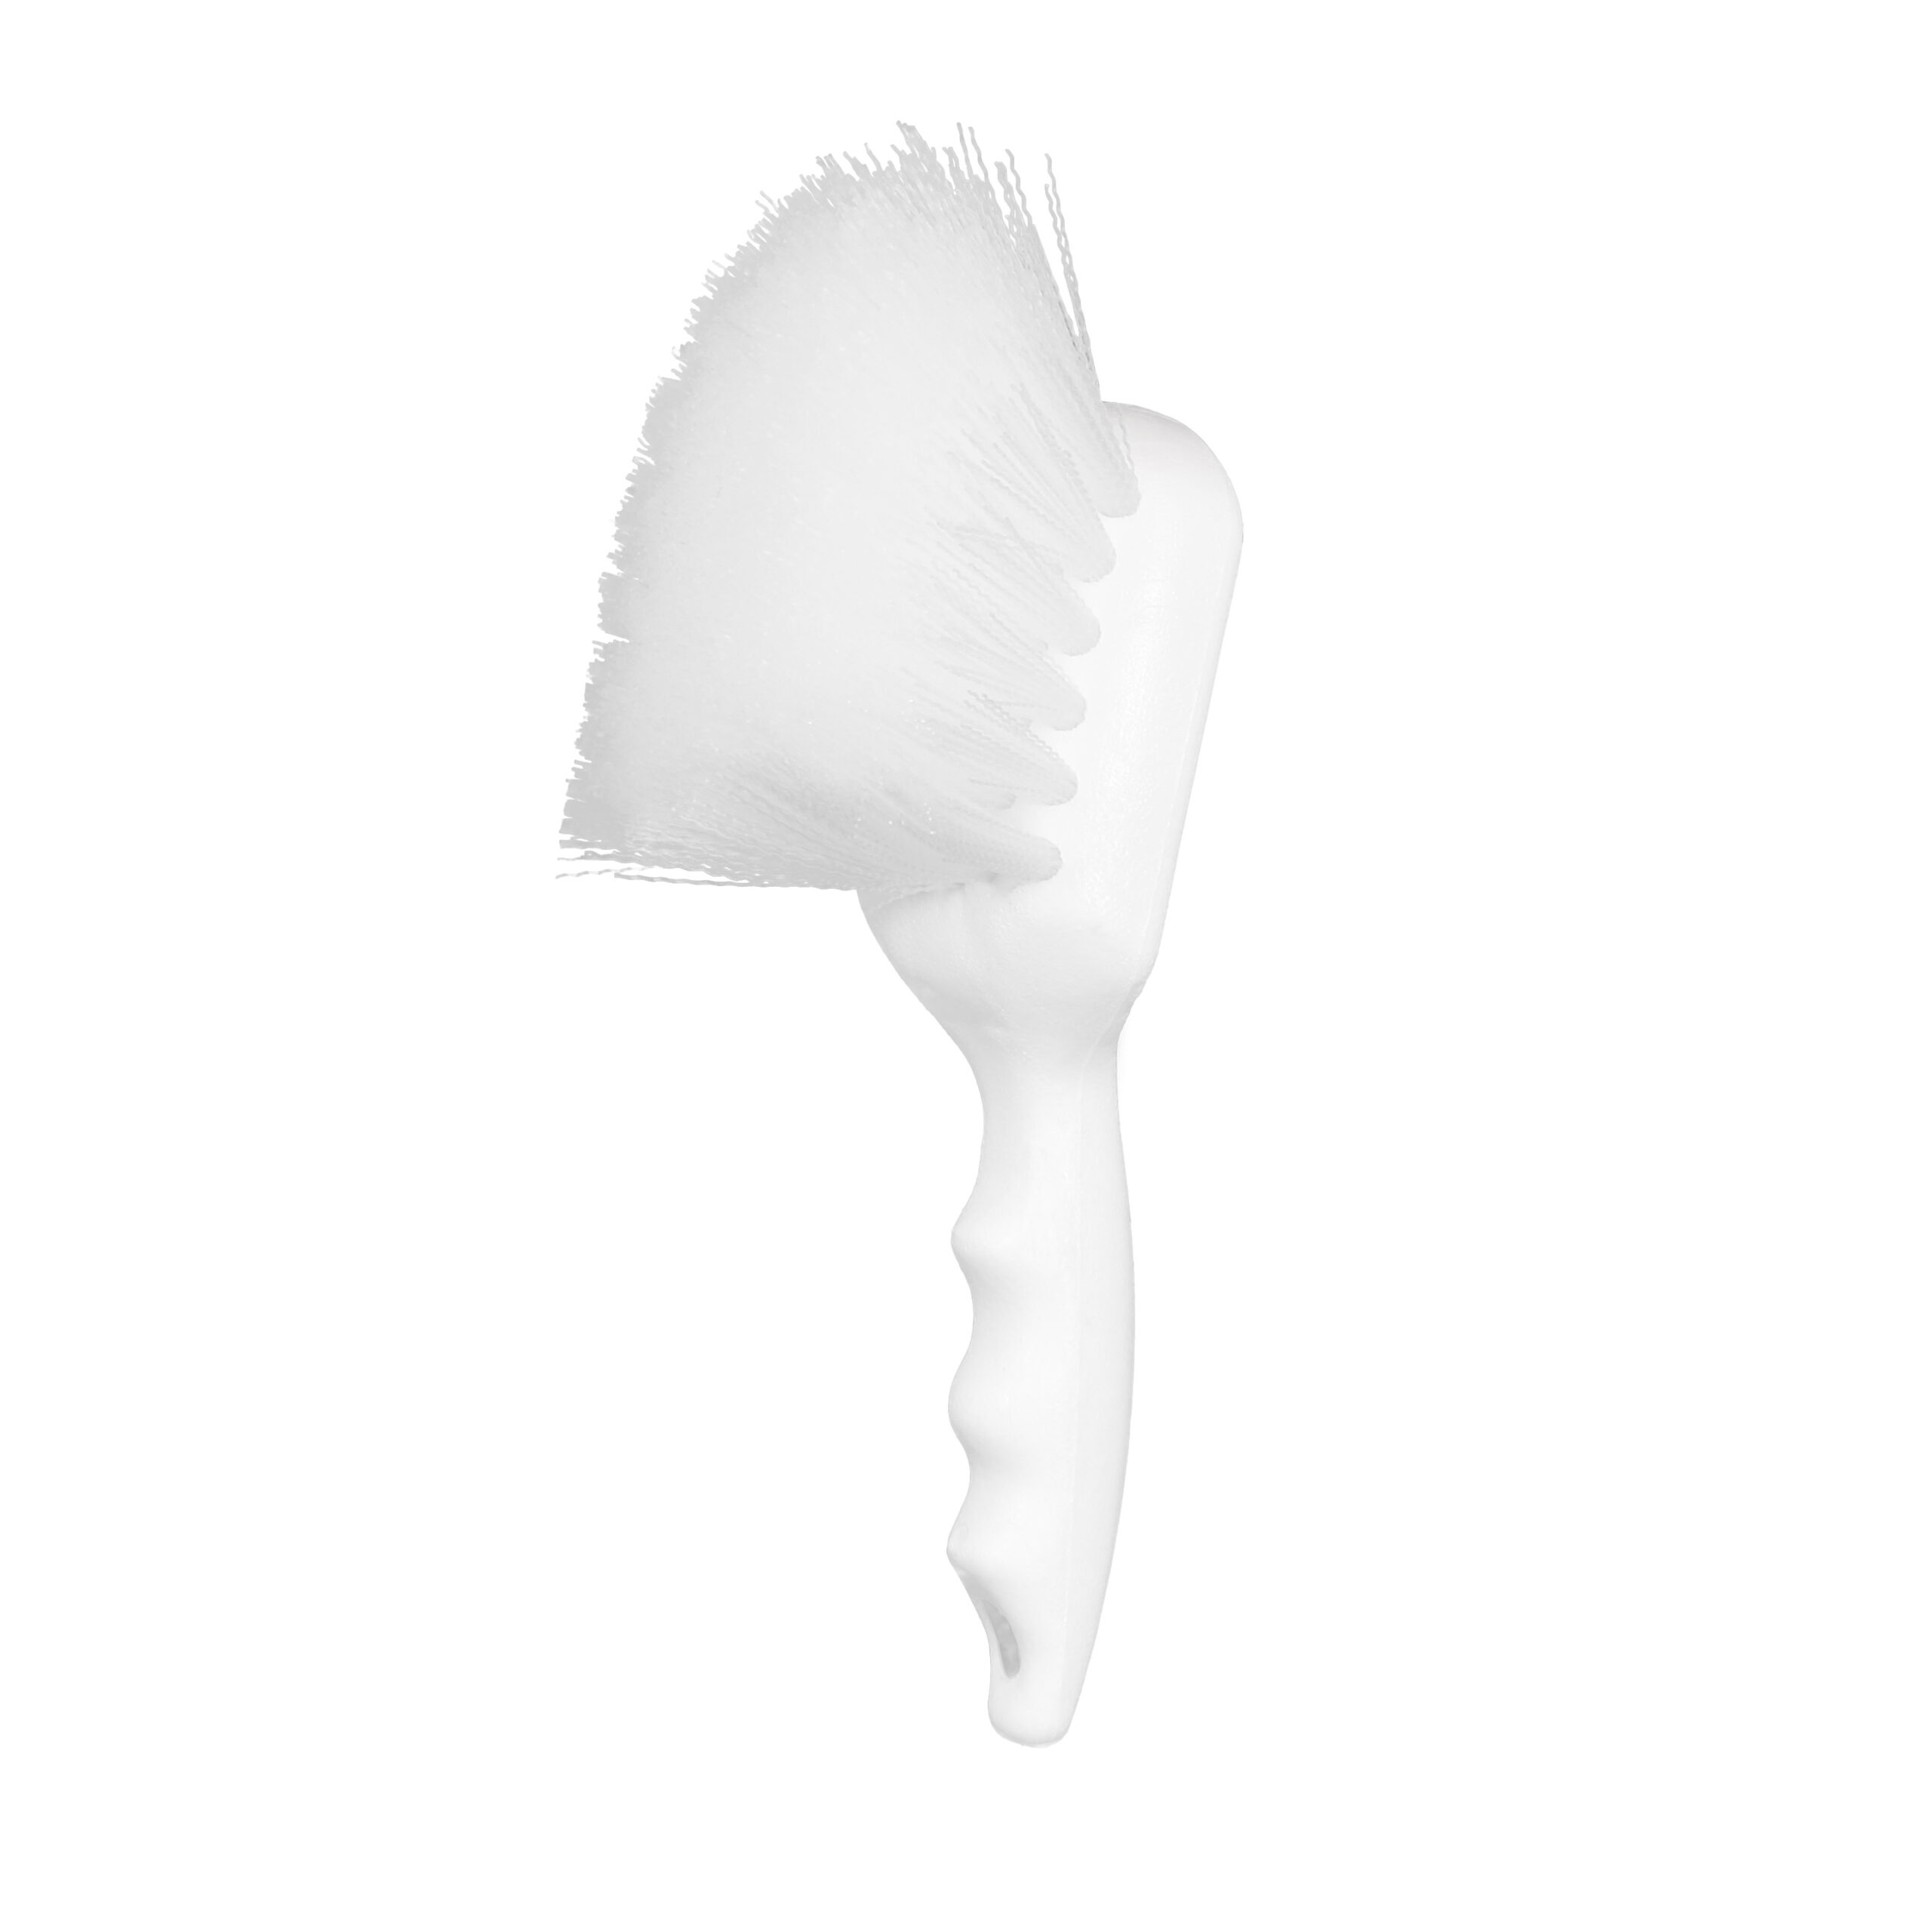 Instrument Care - 3183-P and MR001903 Instrument Cleaning Brushes -  Healthmark Industries